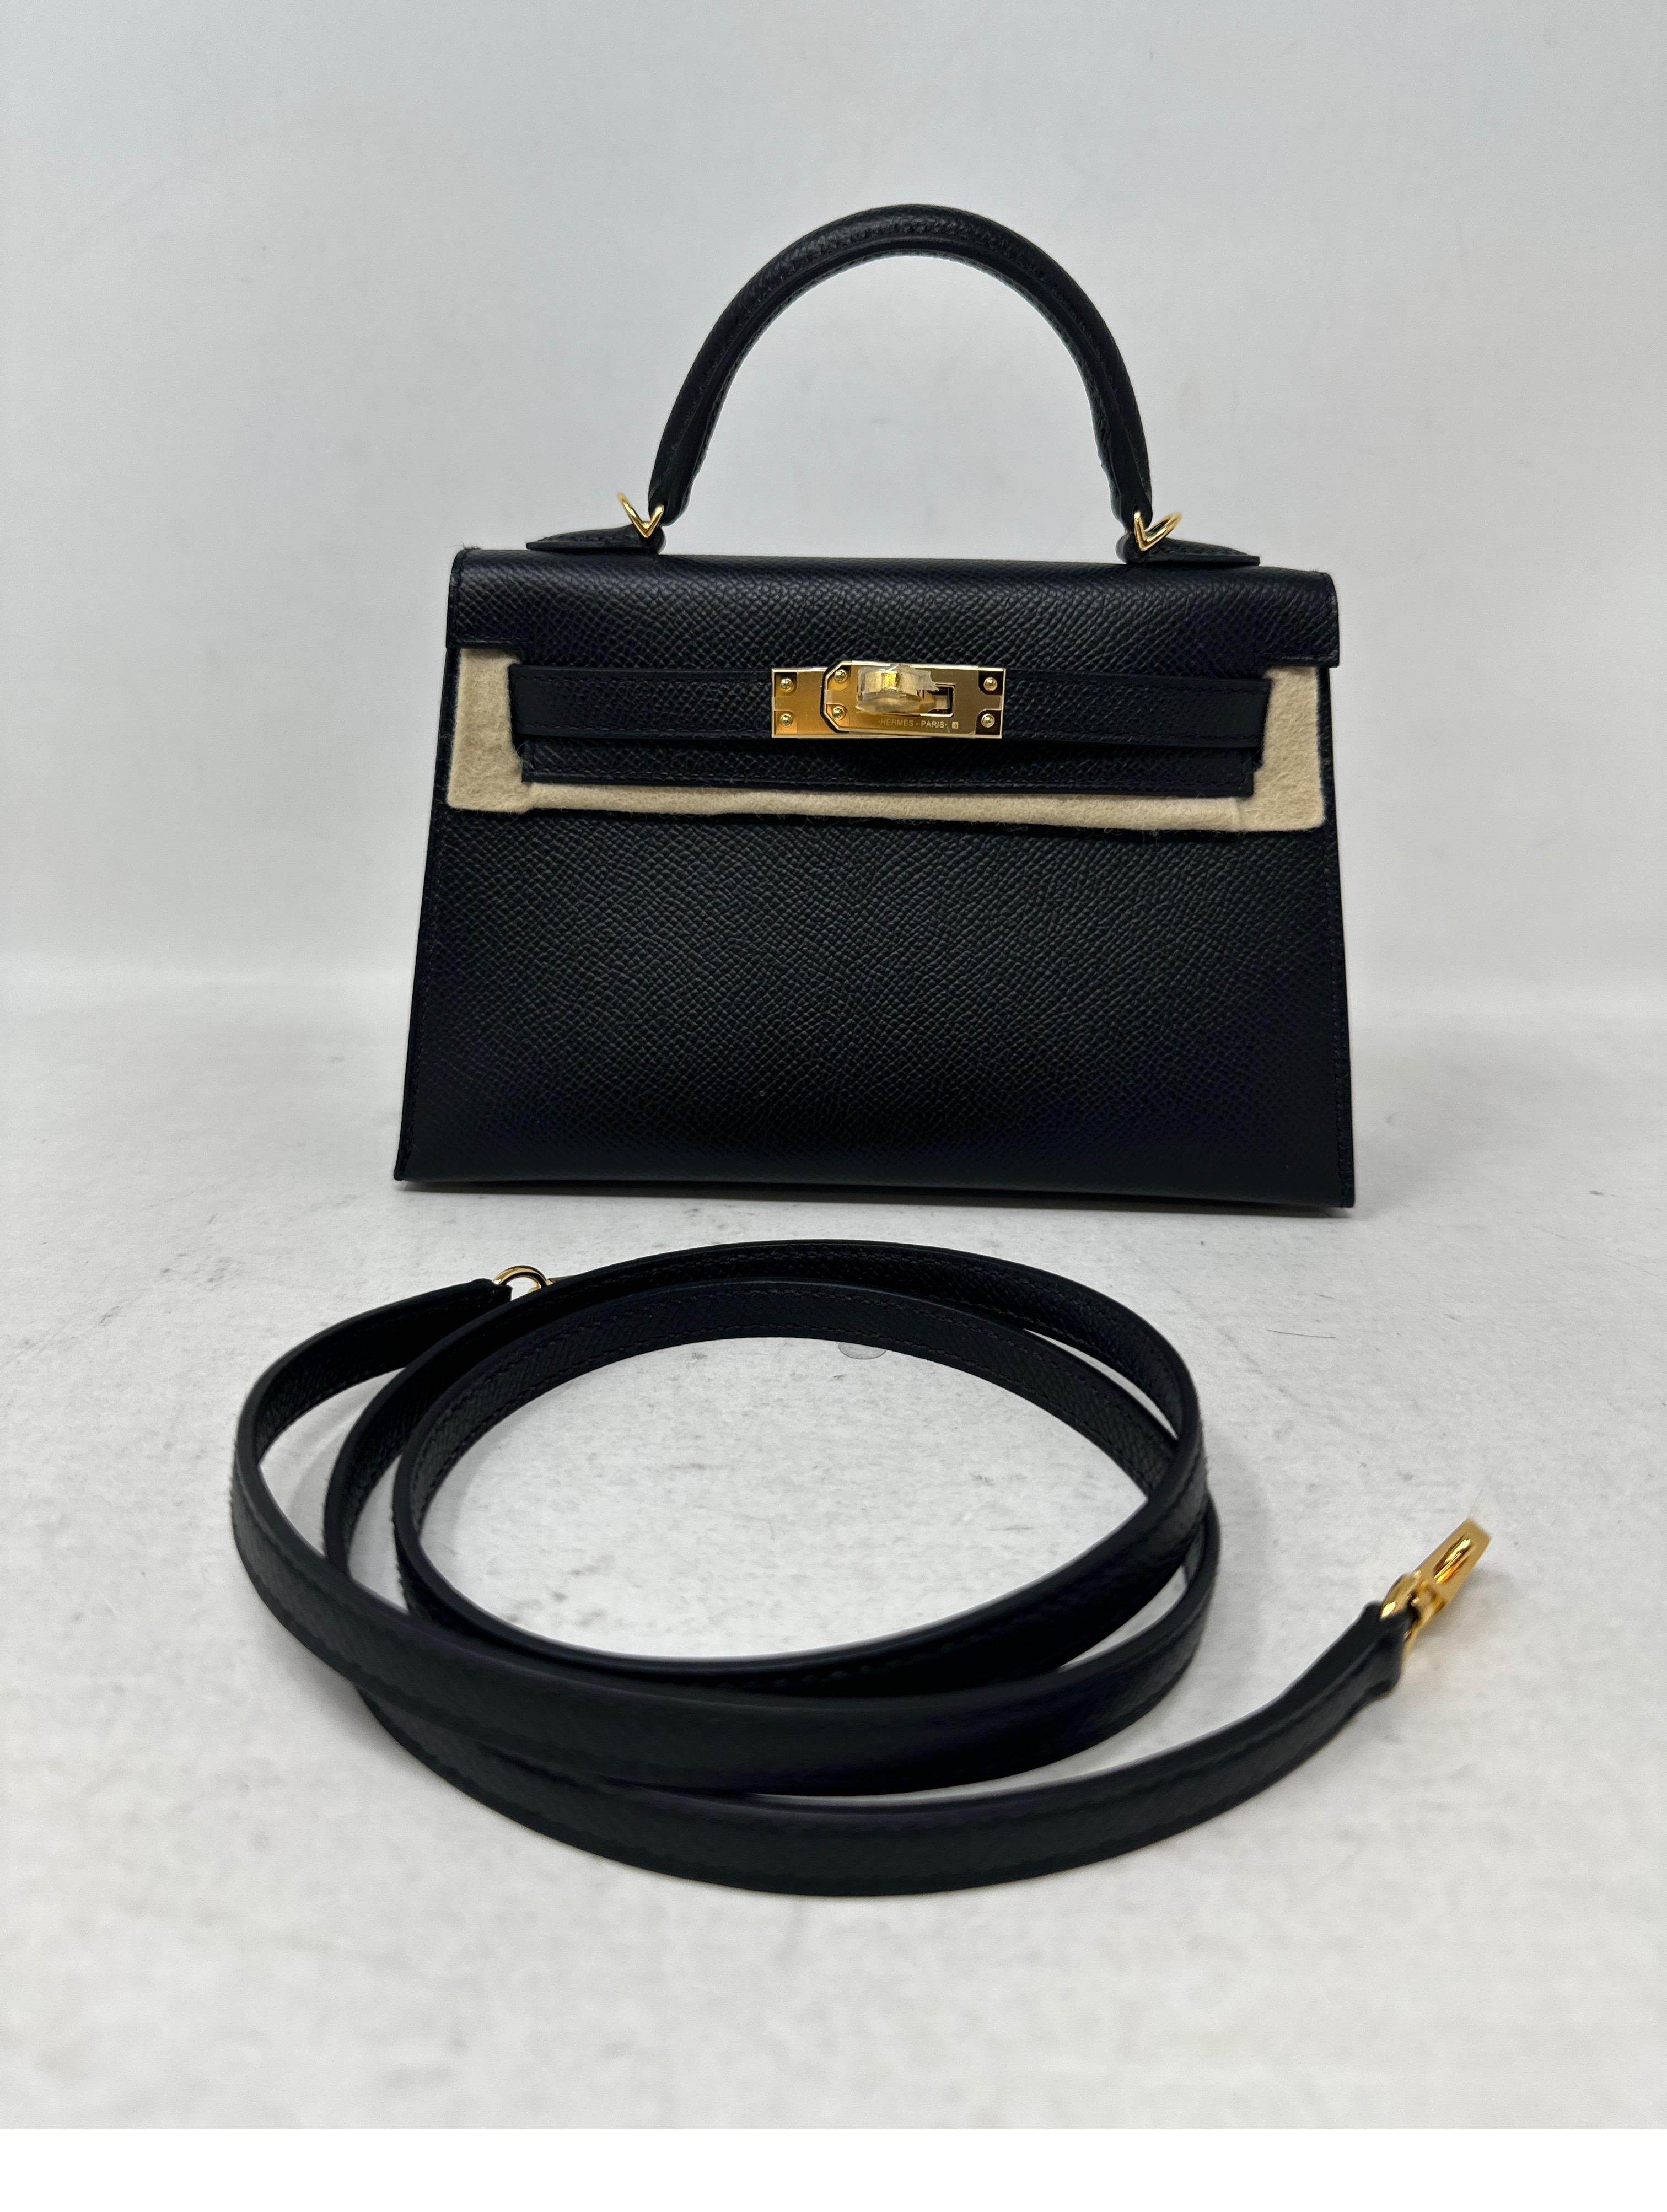 Hermes Black Mini Kelly Bag. Brand new mini Kelly in mint condition. Never used. The most wanted bag. Rare and almost impossible to get now. Gold hardware and black leather. So cute. Includes full set. Includes strap, dust bag and box. Guaranteed